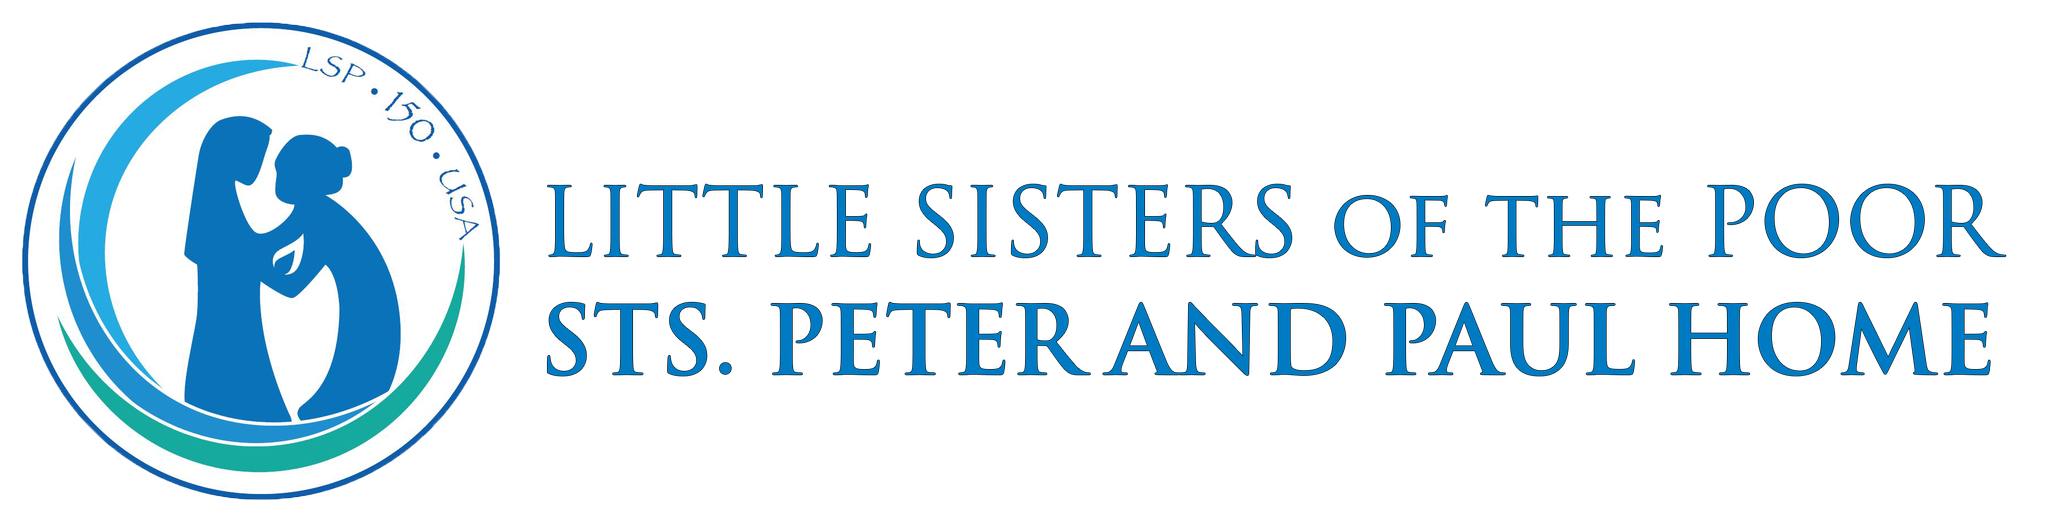 Little Sisters of the Poor Pittsburgh